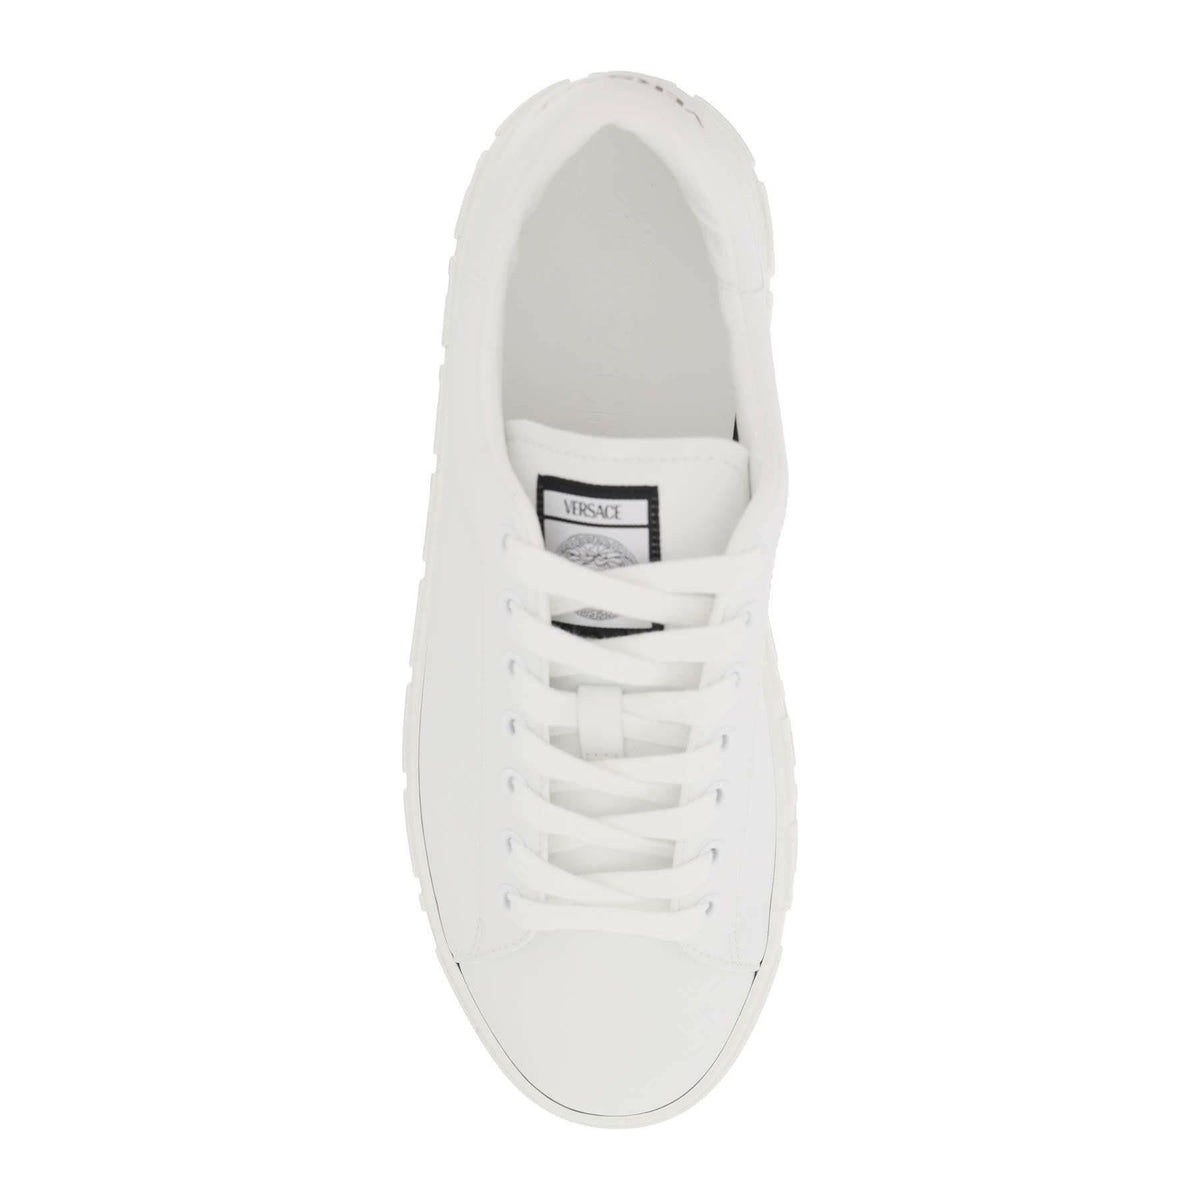 White Faux Leather Greca Sneakers With Embossed Motif VERSACE JOHN JULIA.